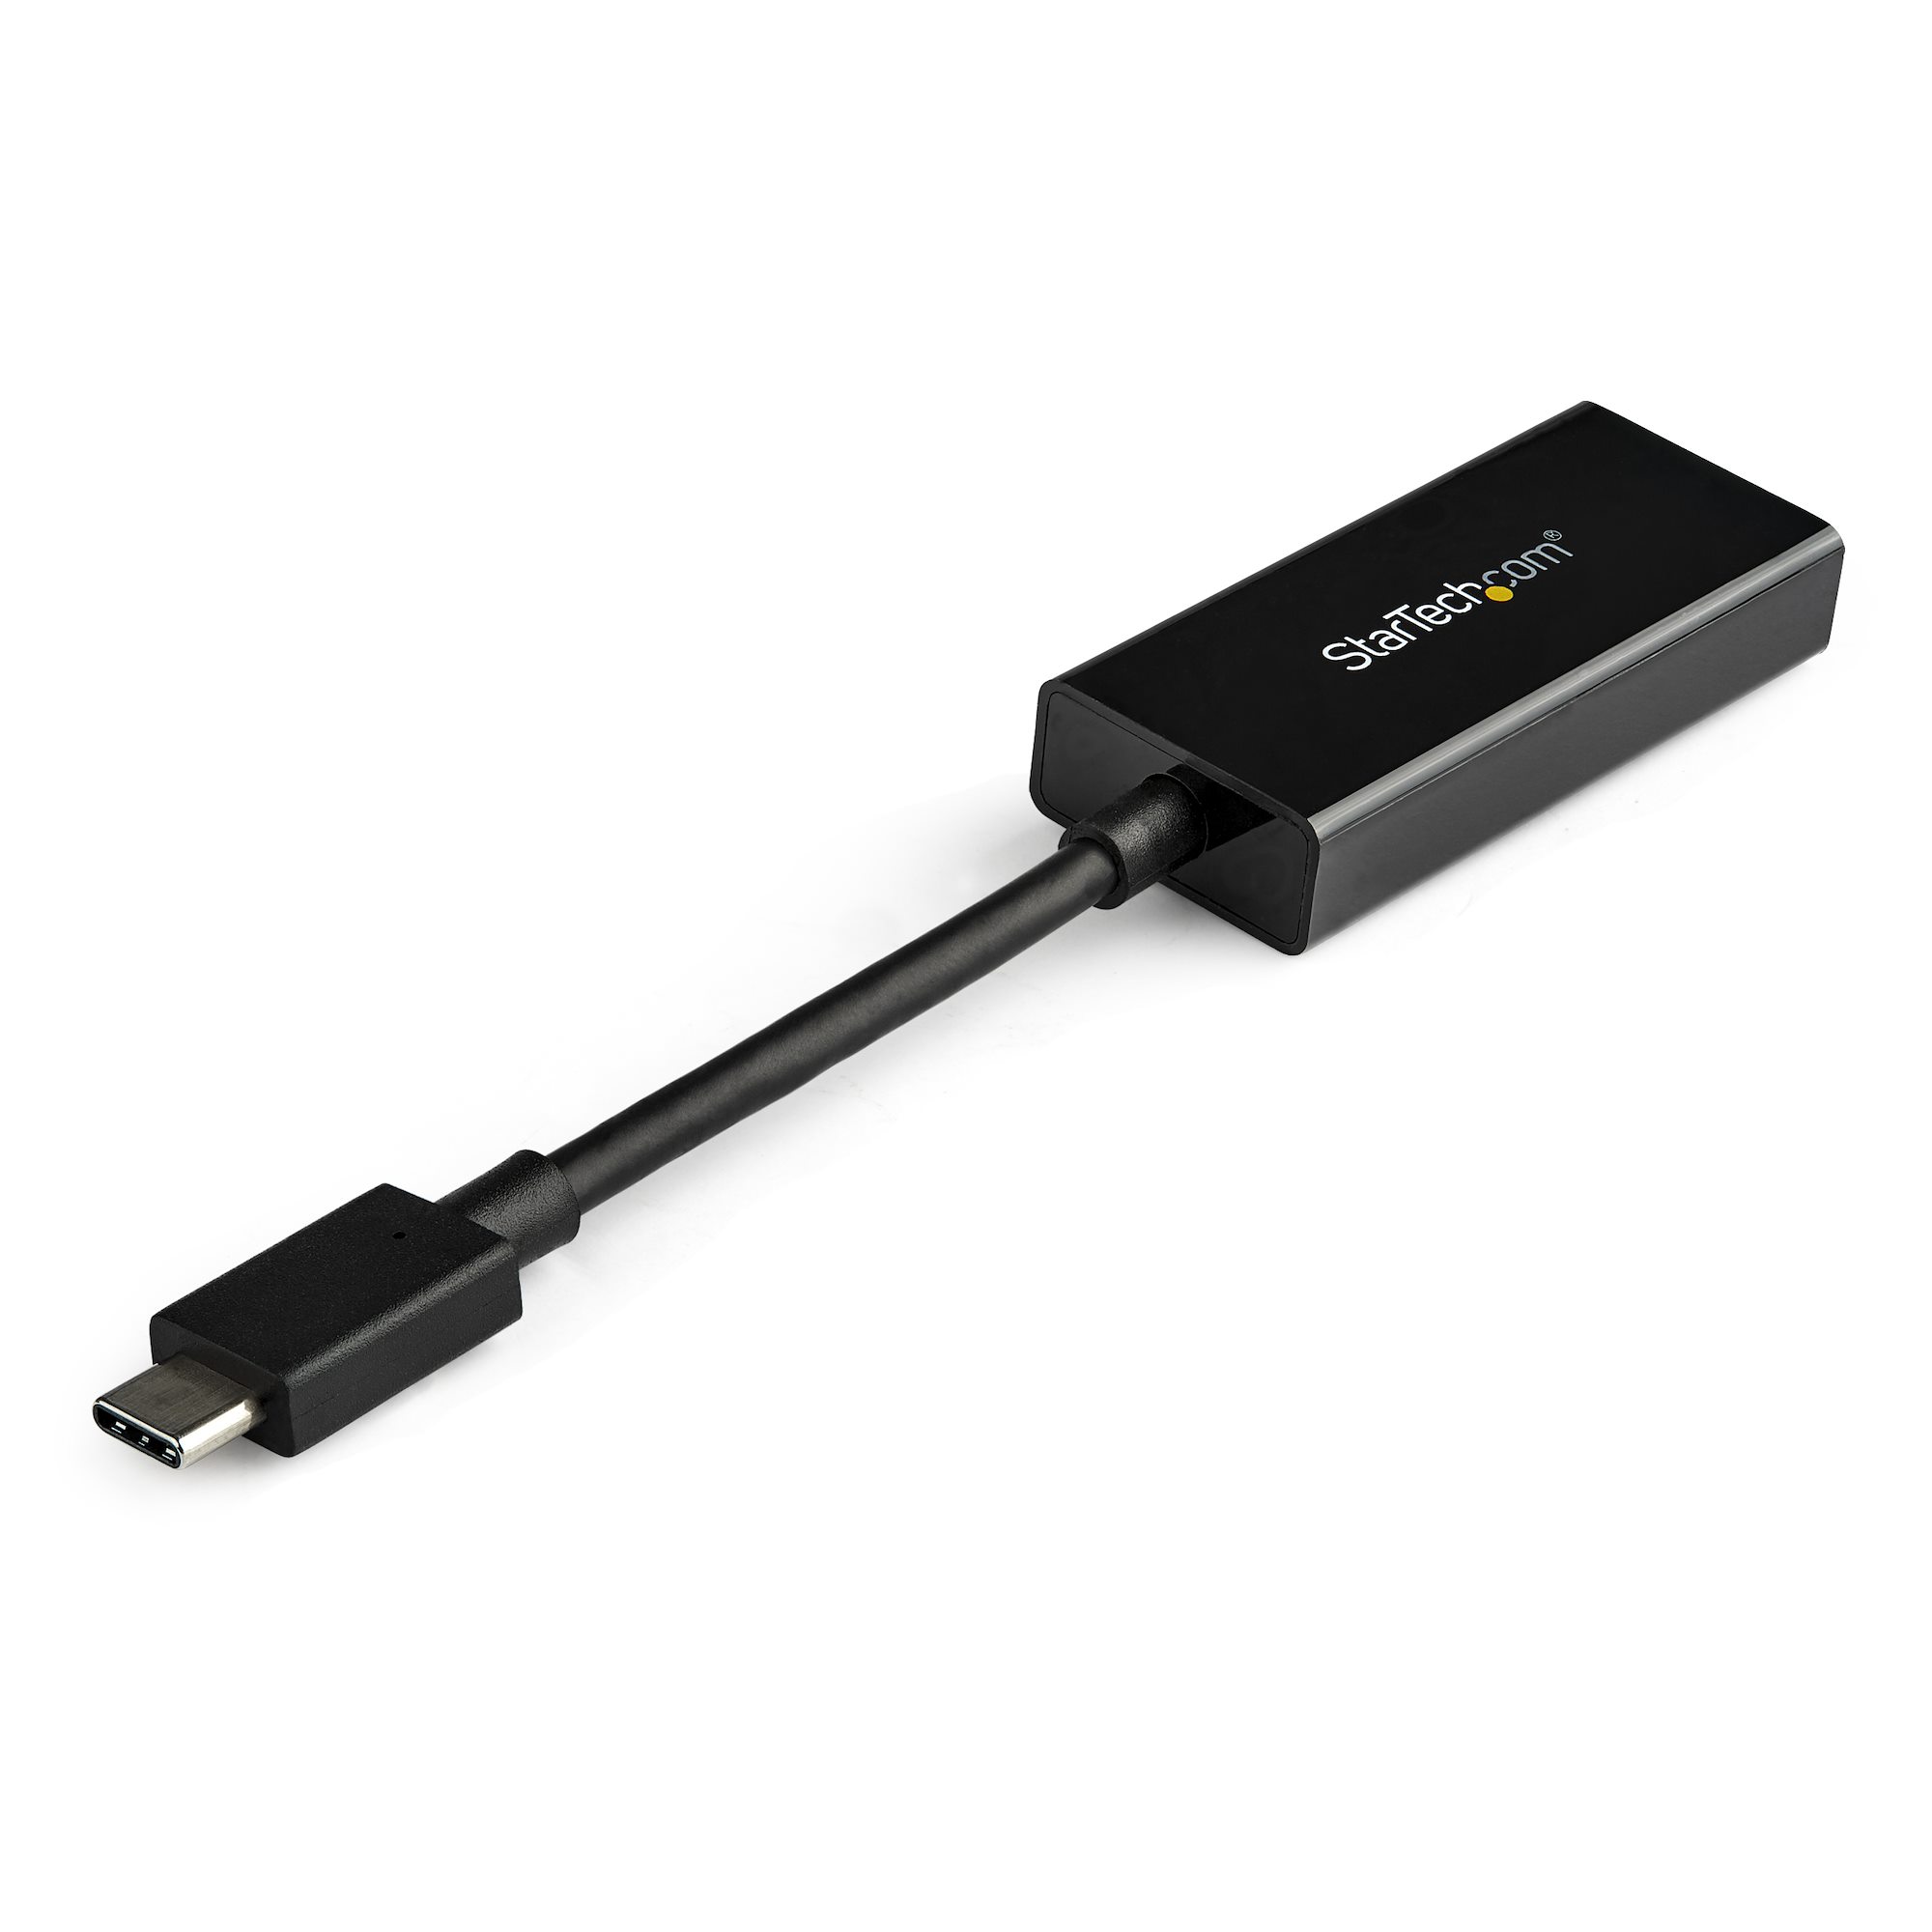 Startech USB-C to HDMI Adapter with HDR CDP2HD4K60H